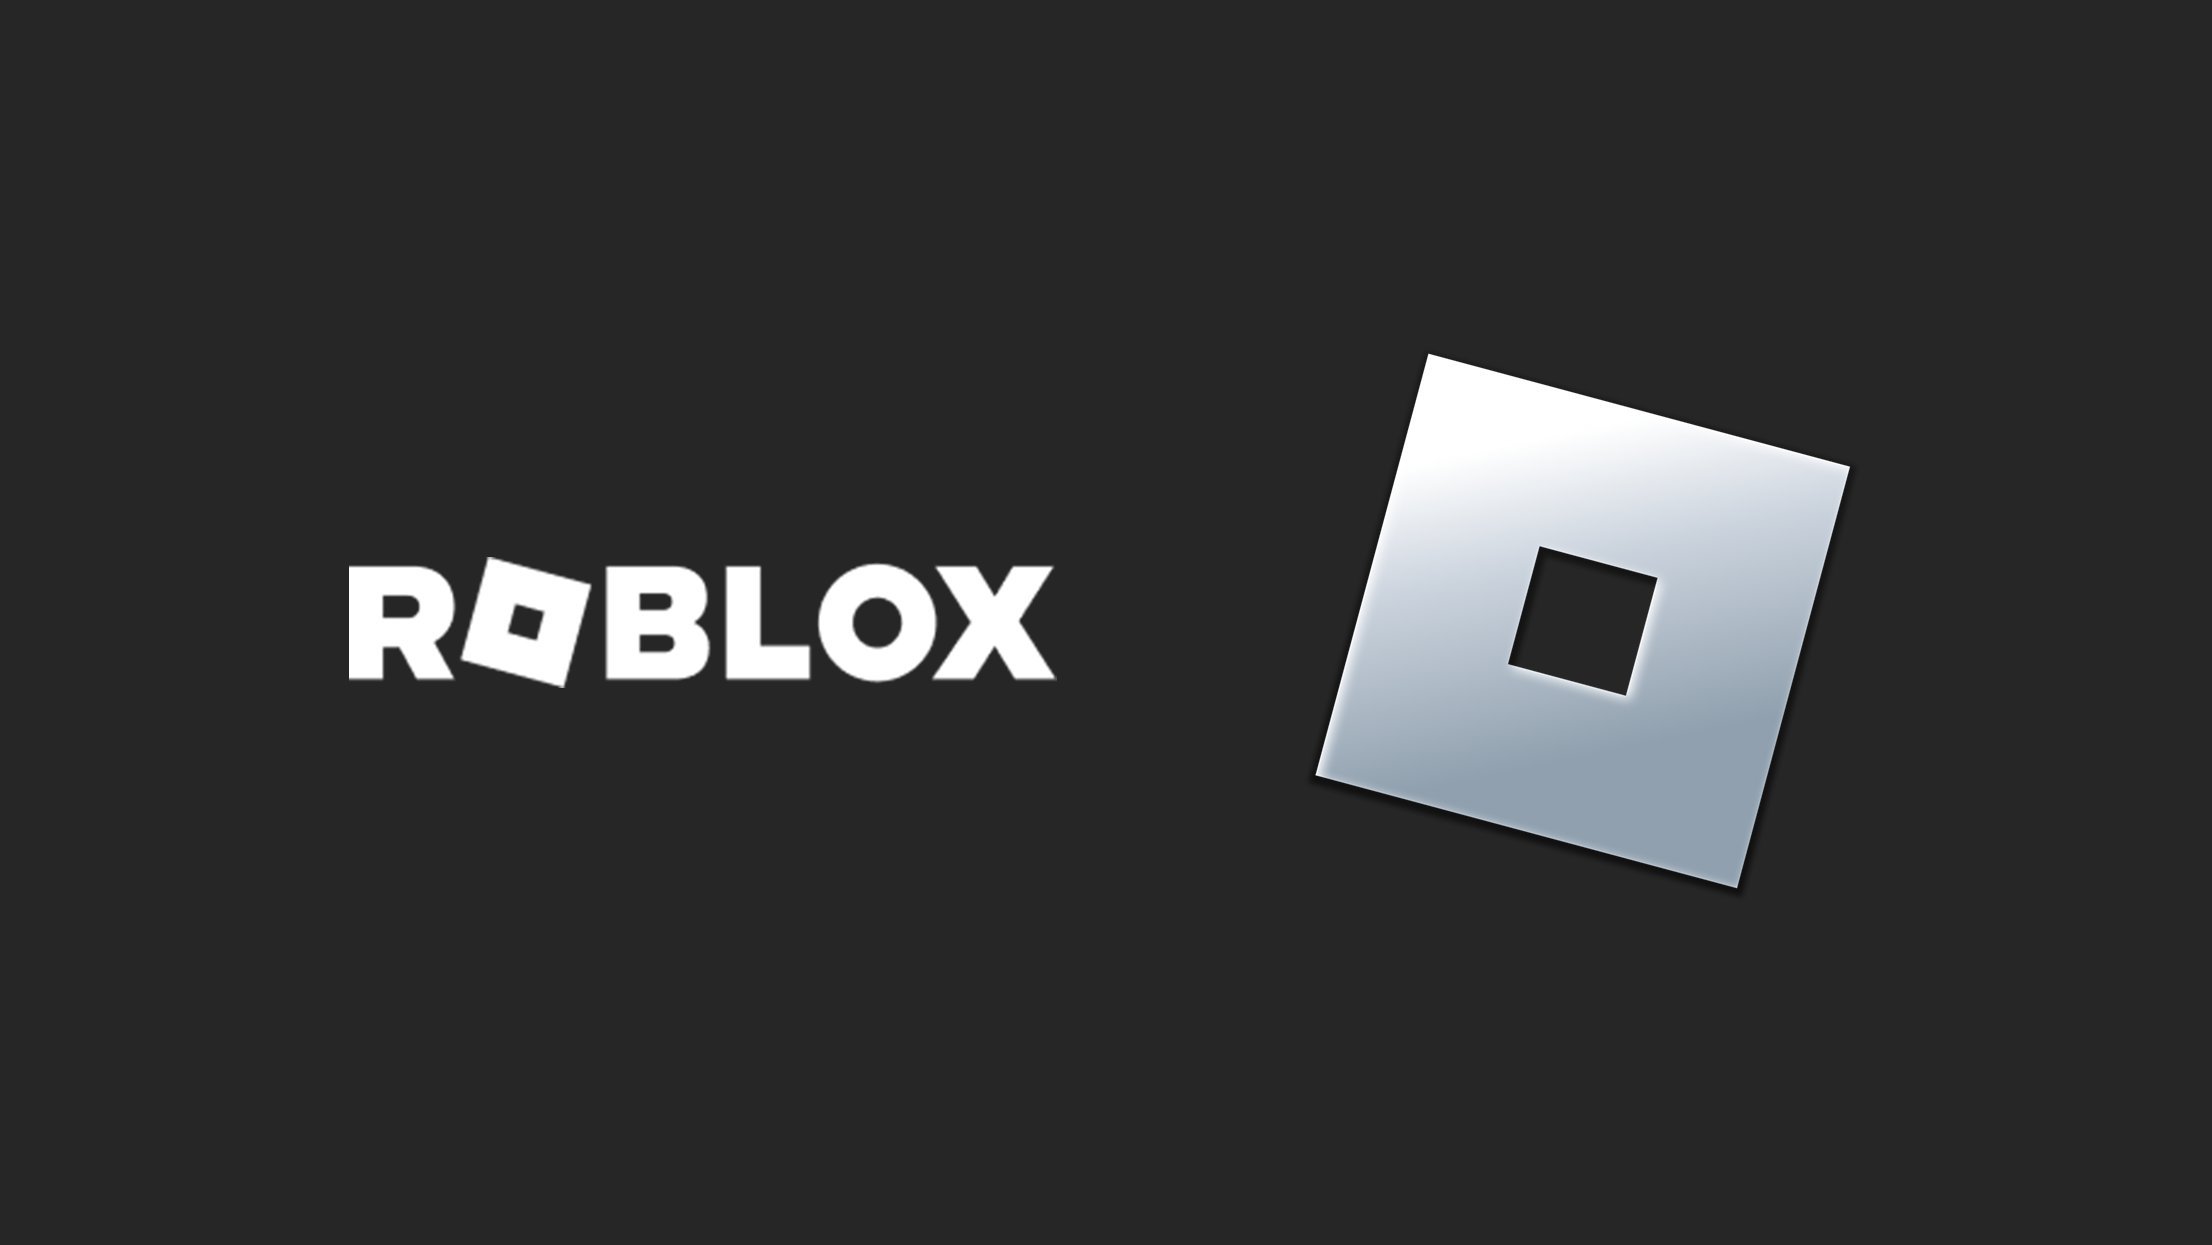 did you guys see the new roblox logo